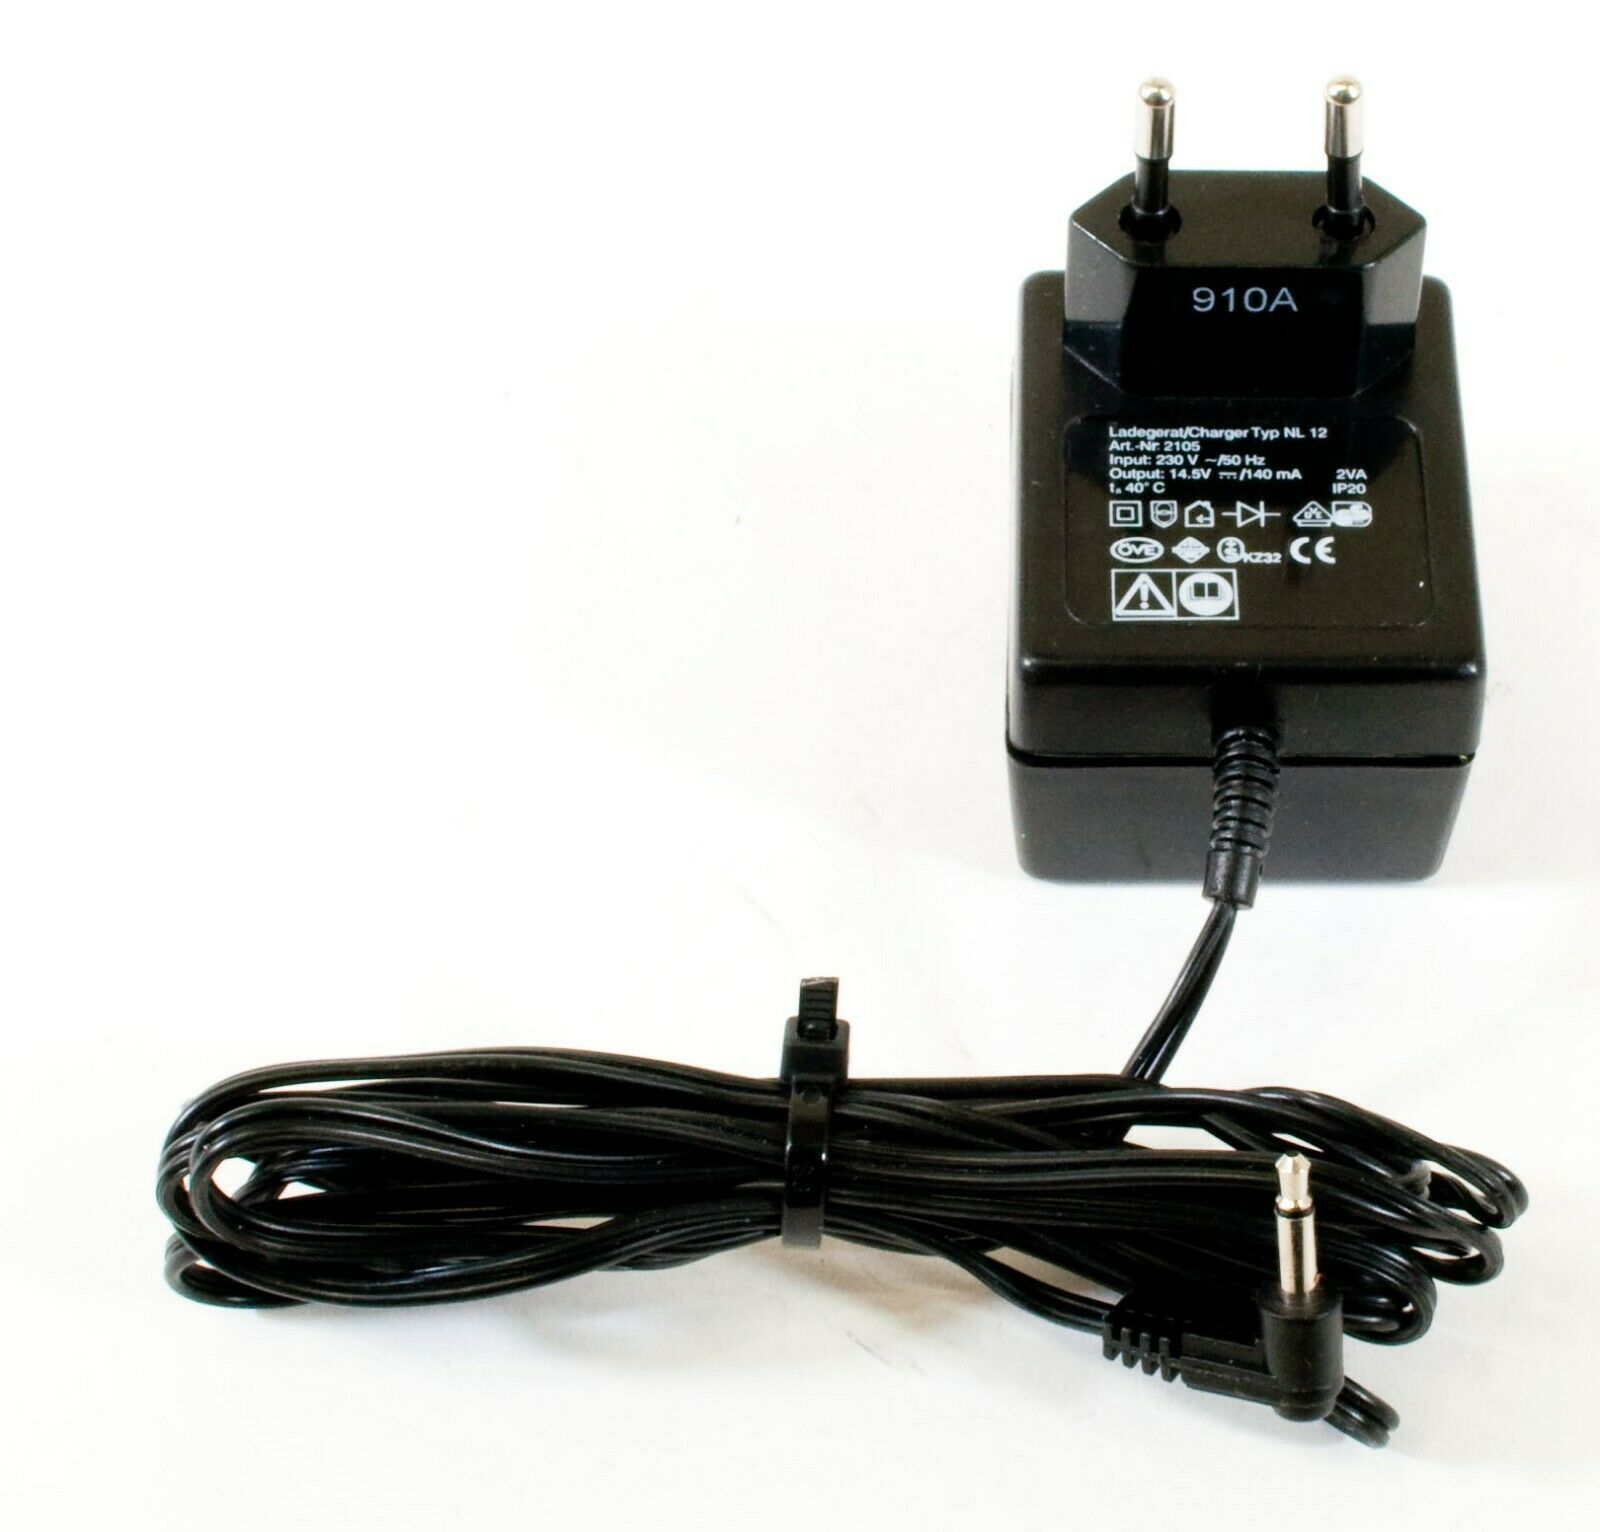 Gardena Charger Typ NL 12 AC Adapter 14.5V 140mA Power Supply Output Current: 140 mA Voltage: 14.5